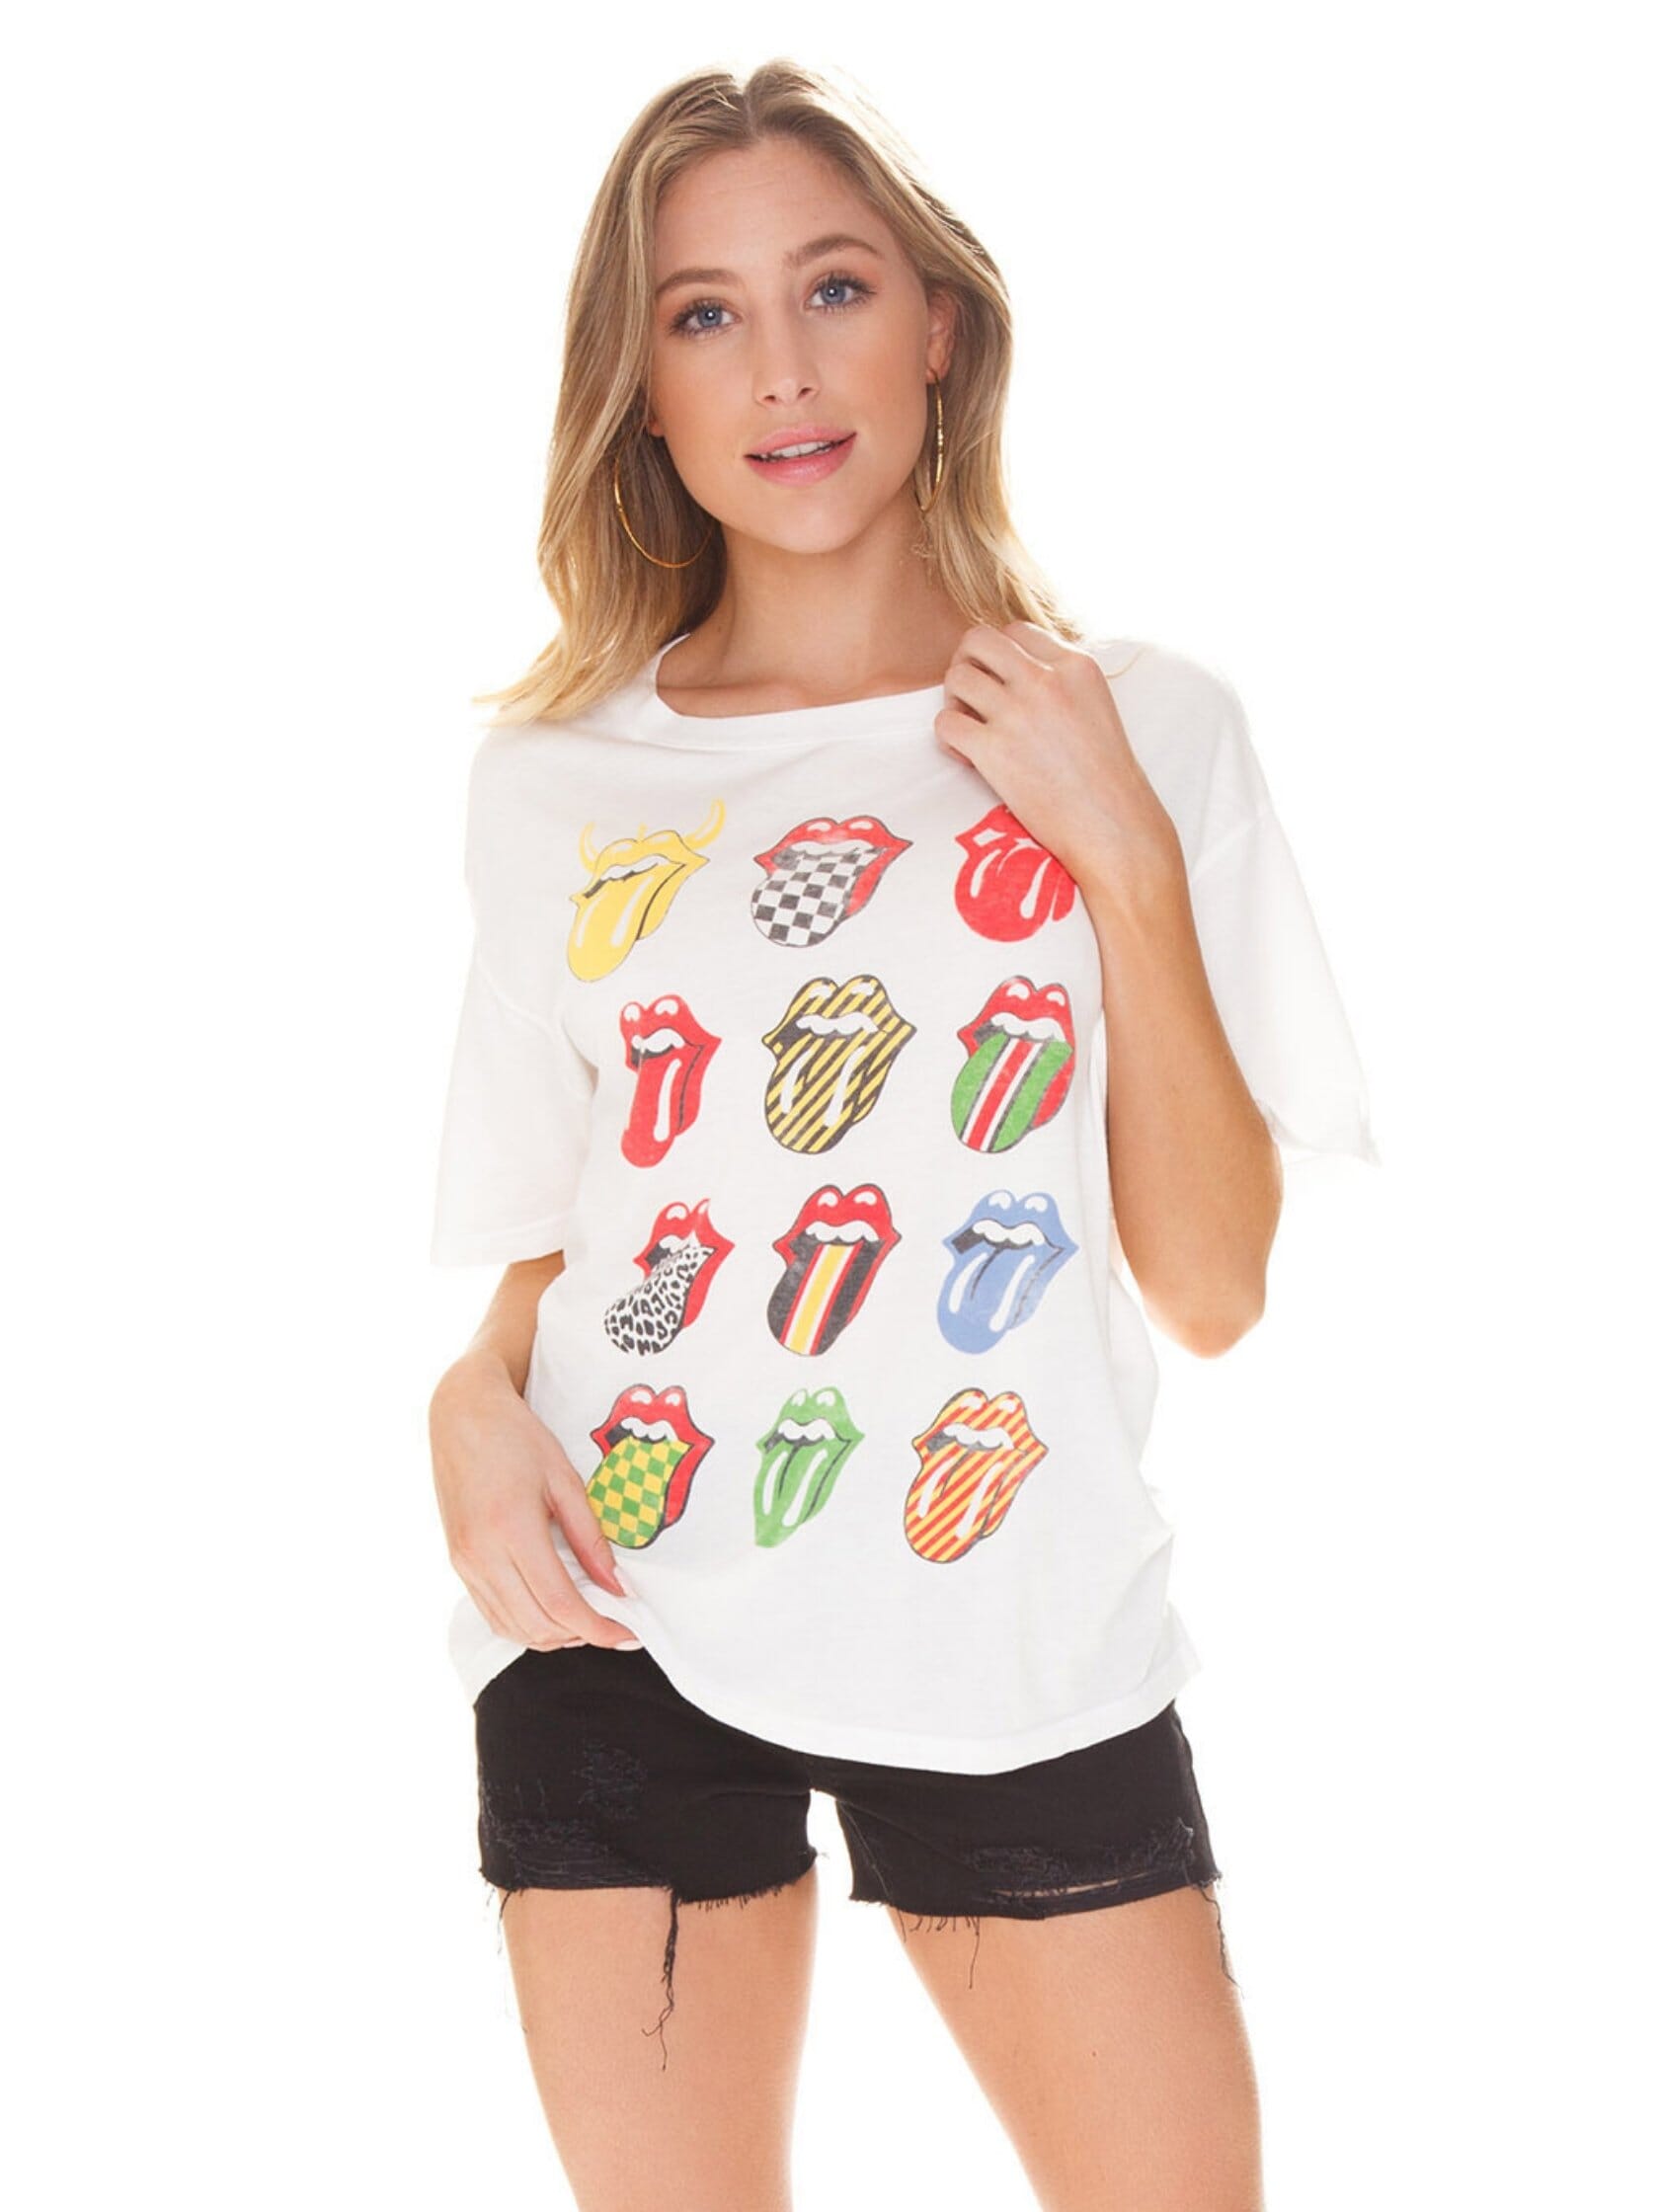 DAYDREAMER Rolling Stones 12 Tongues Boyfriend Tee in Vintage White